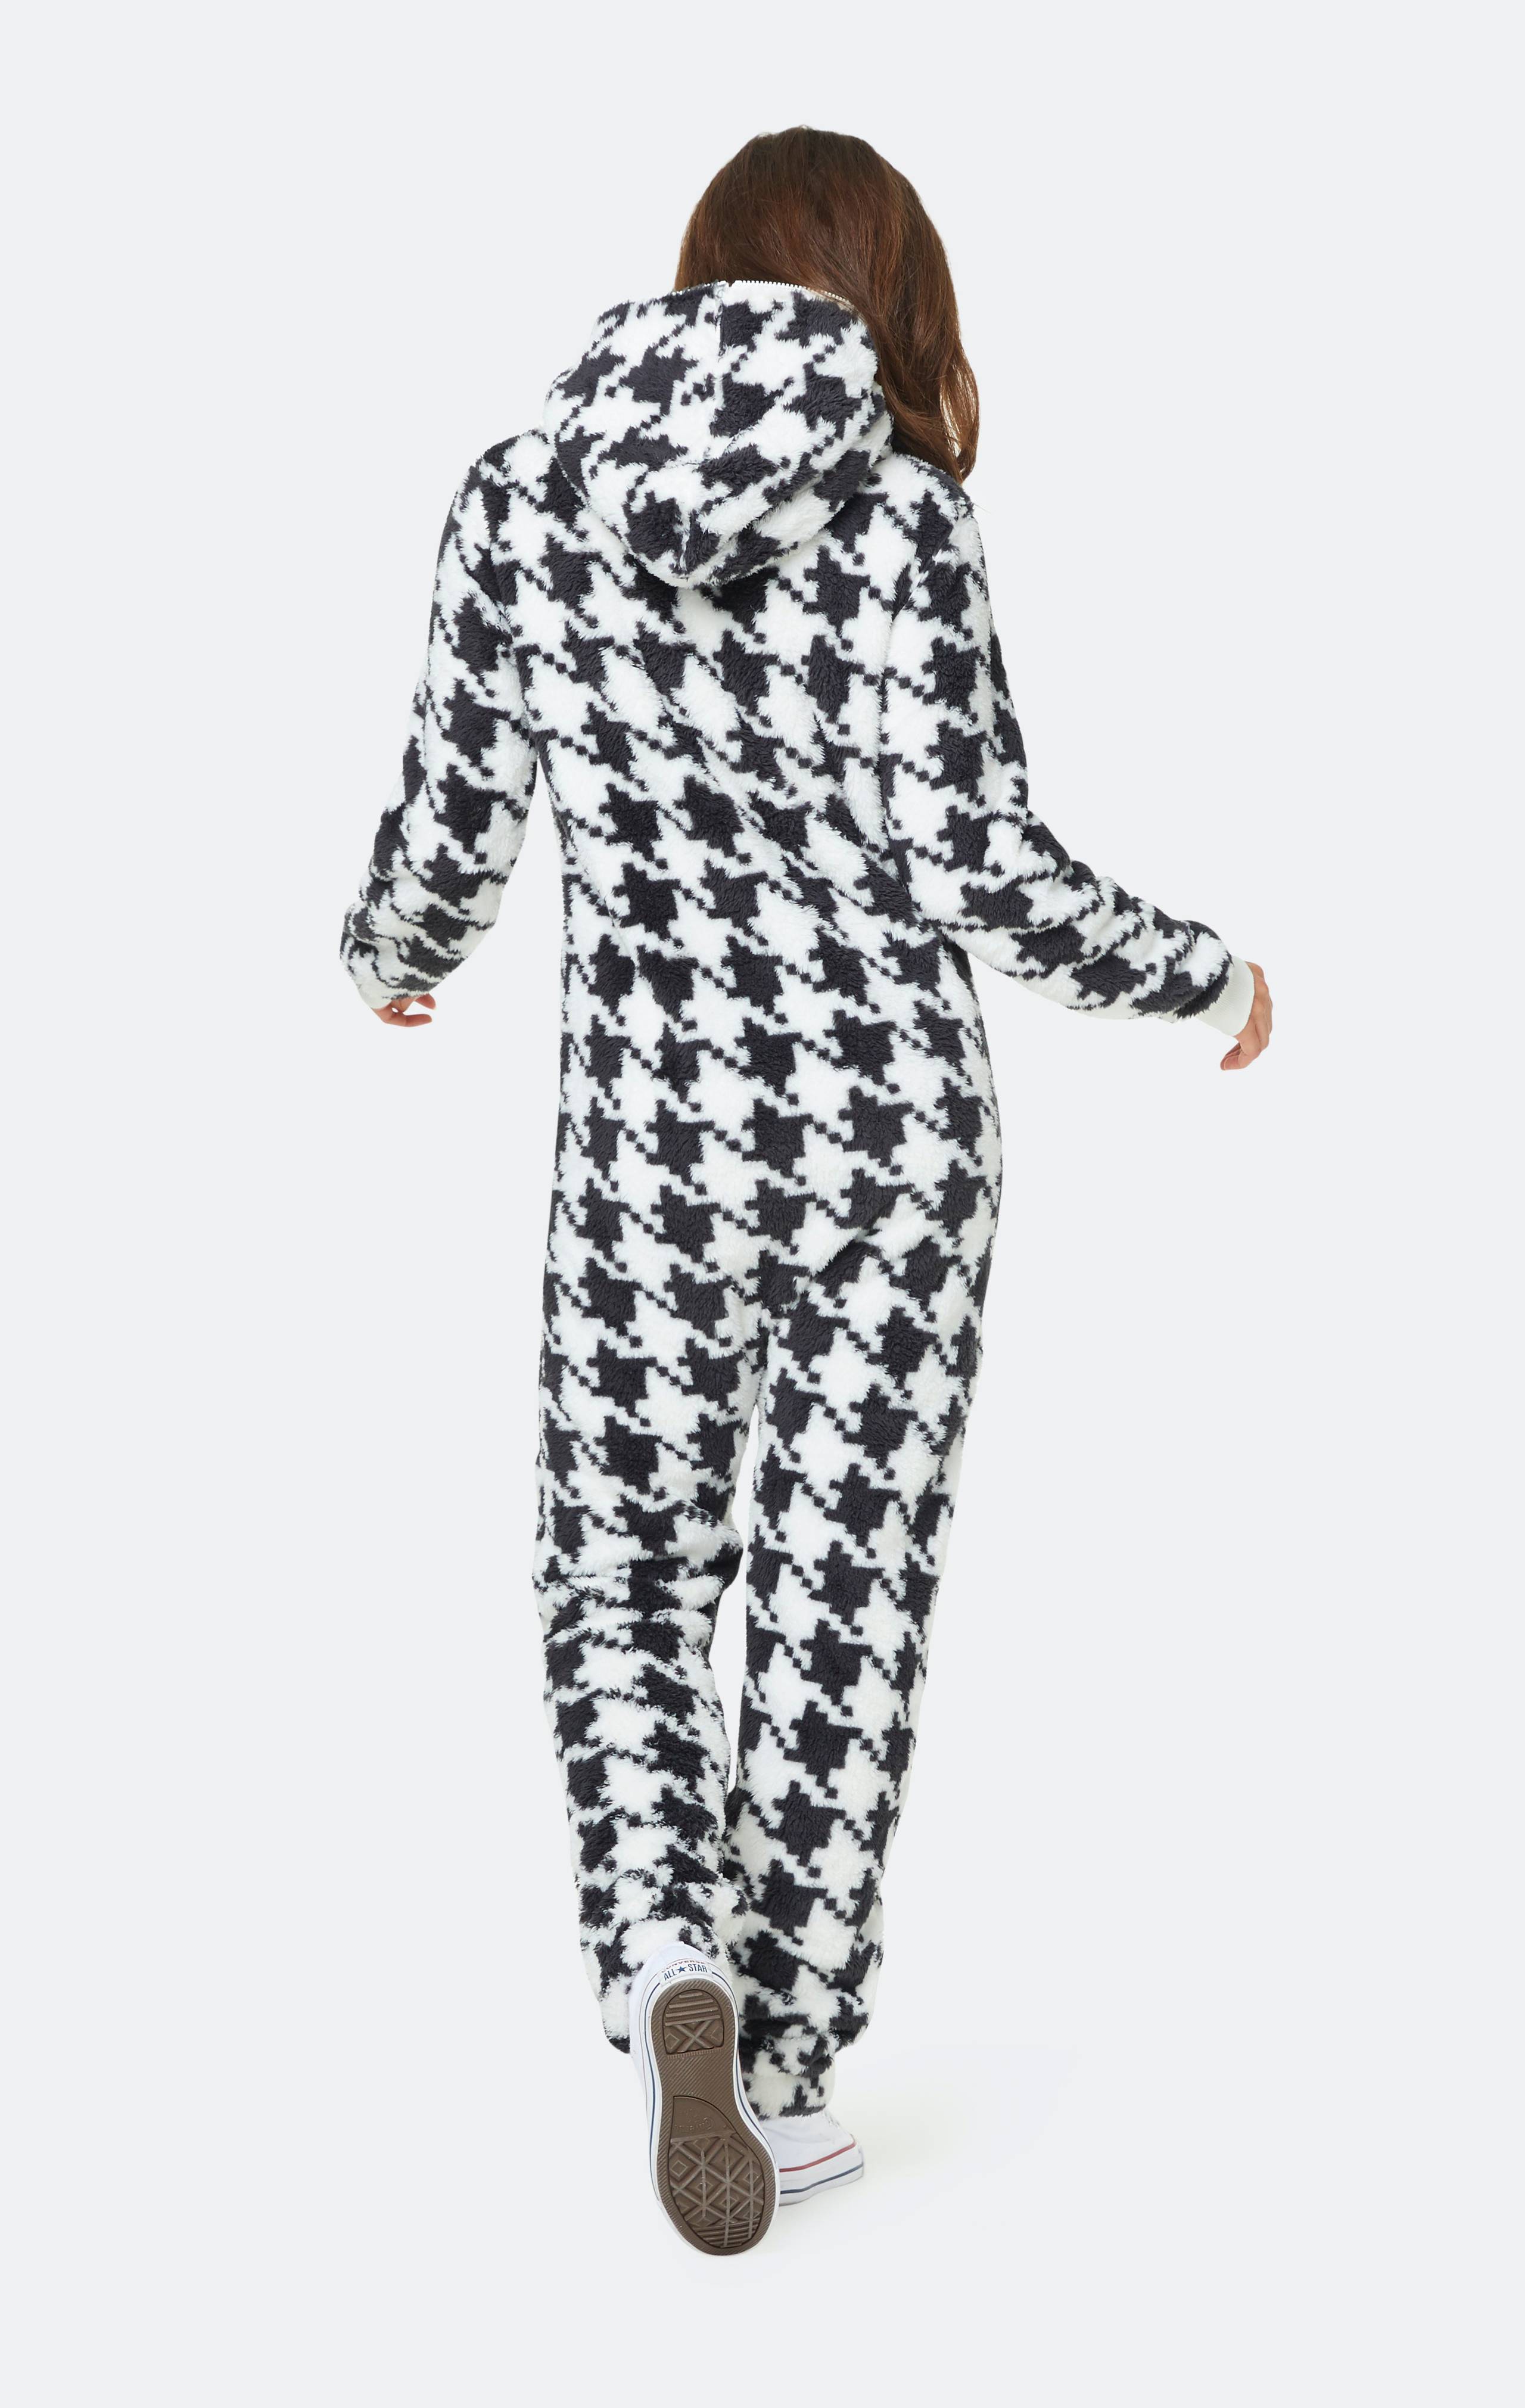 Onepiece The New Puppy Jumpsuit Houndsthooth - 6